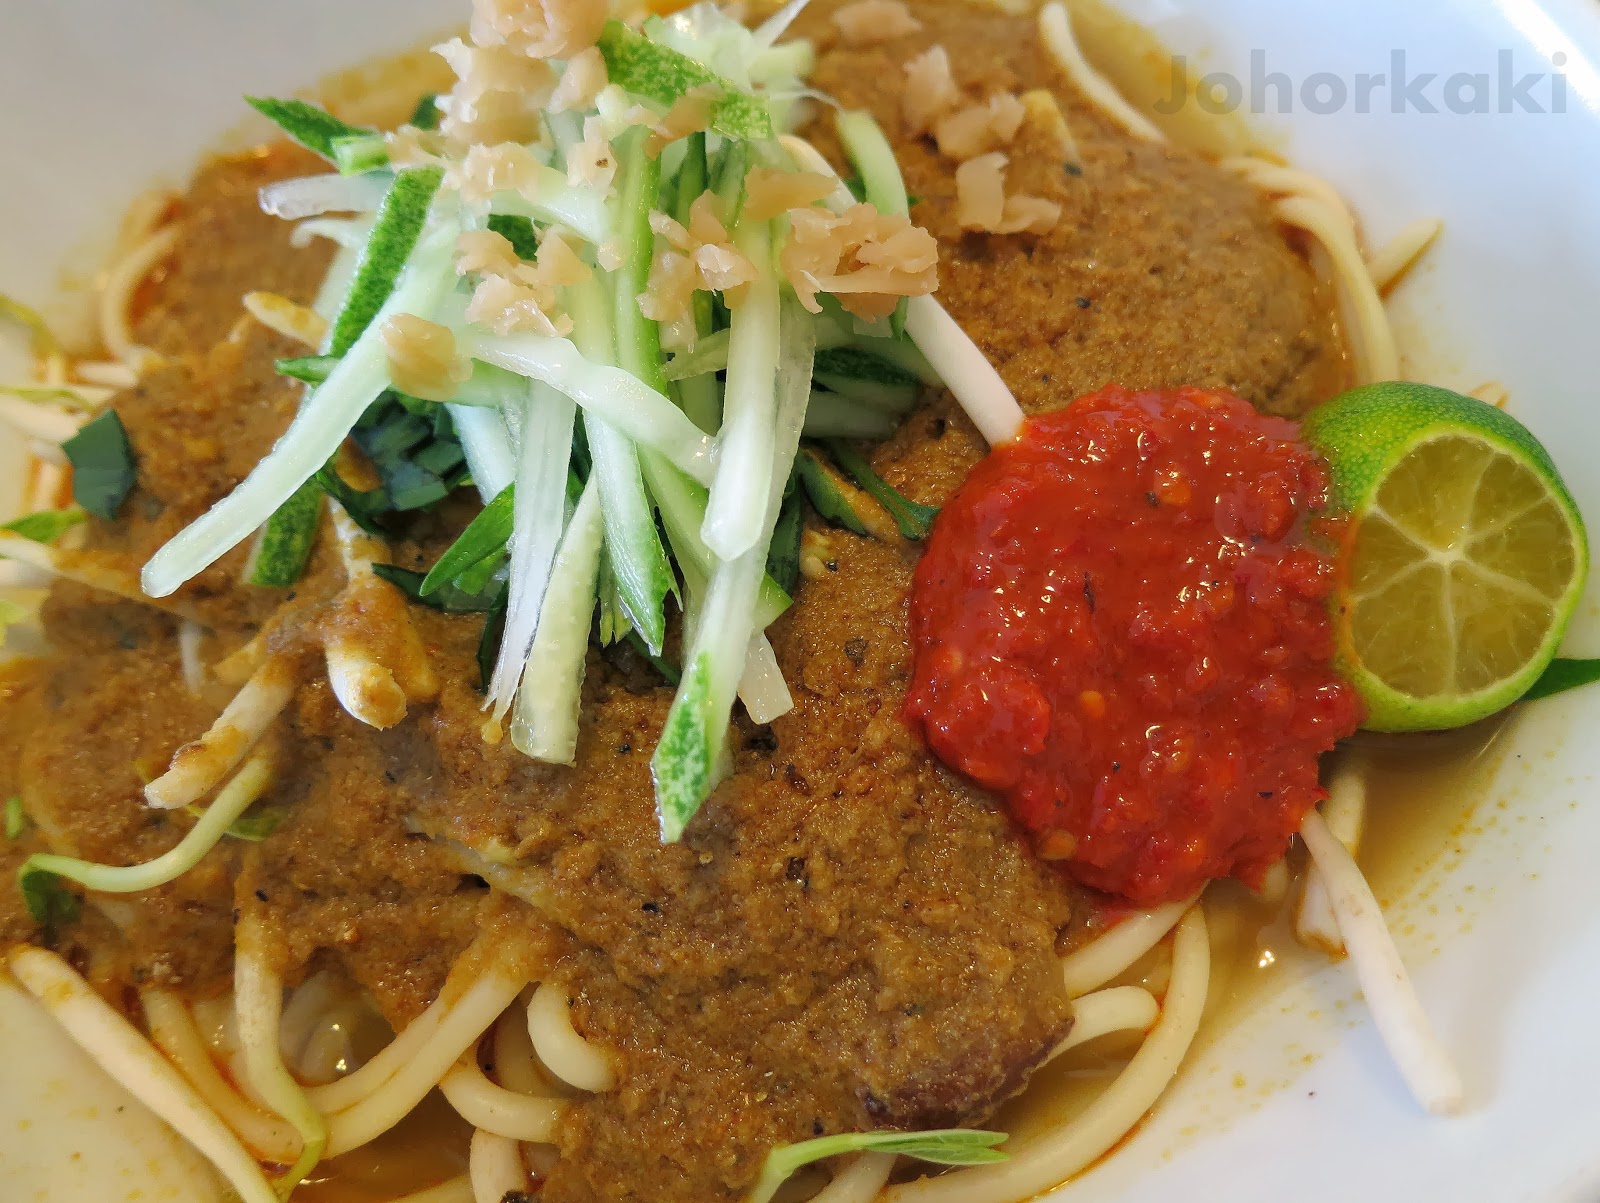 Top 10 Unique Johor Foods which Visitors Must Try - 2014 |Tony Johor